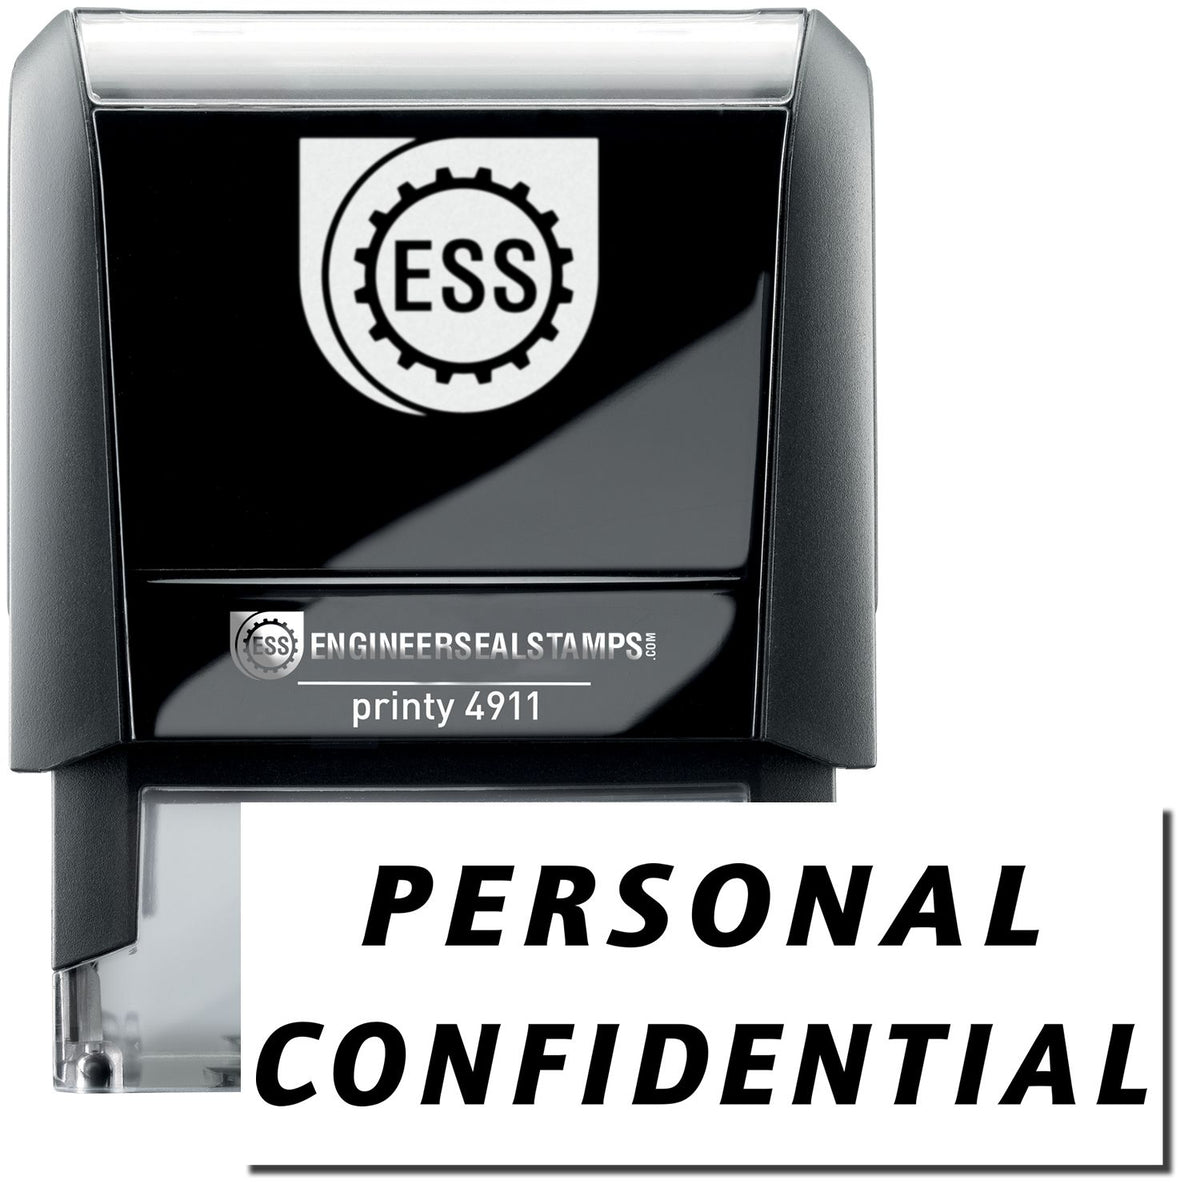 A self-inking stamp with a stamped image showing how the text &quot;PERSONAL CONFIDENTIAL&quot; in italic font is displayed after stamping.